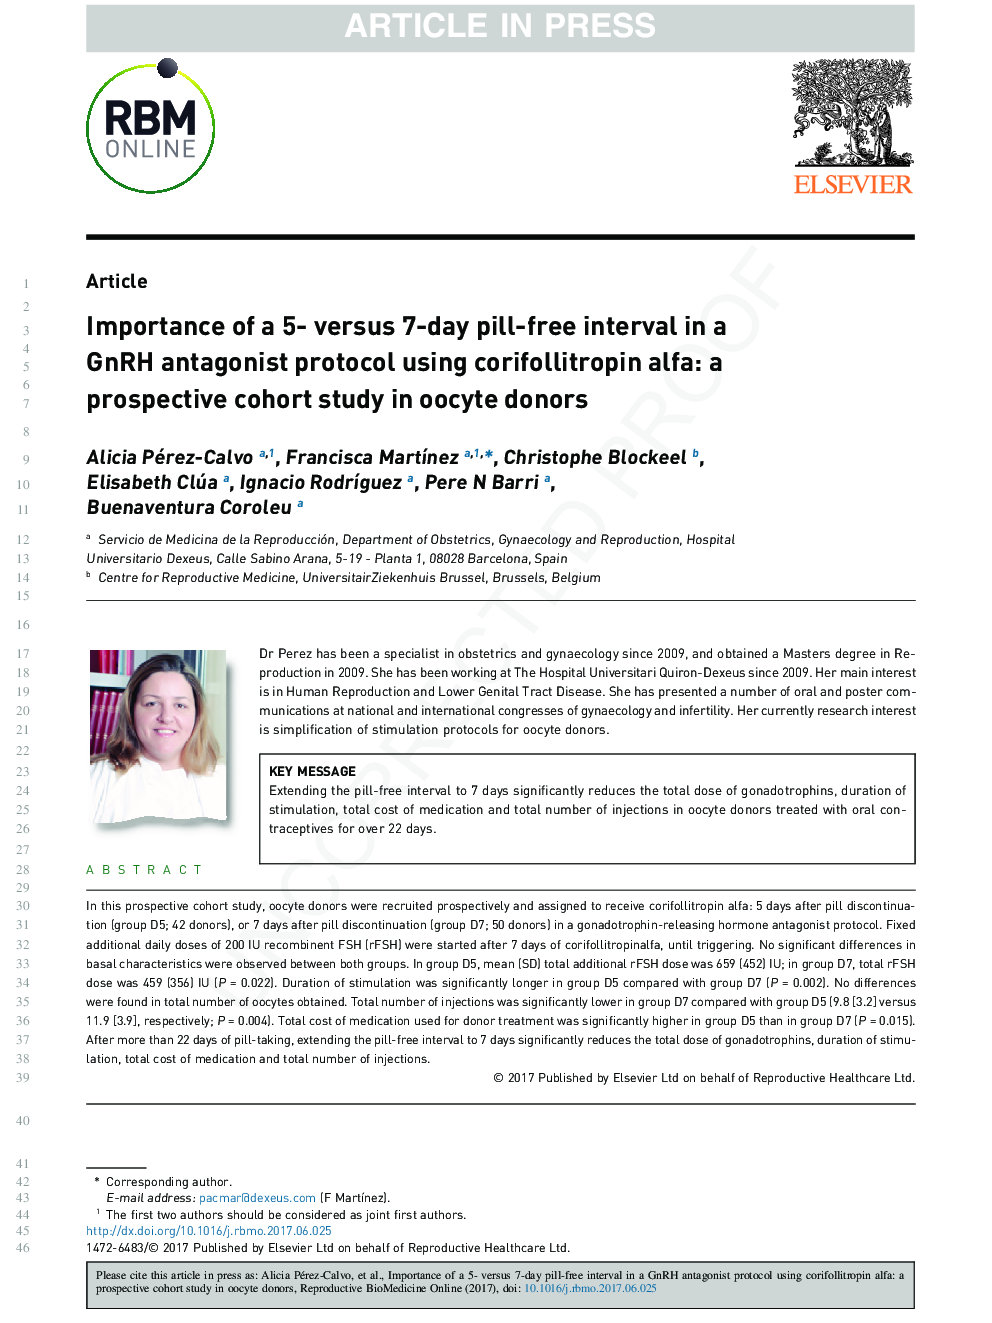 Importance of a 5- versus 7-day pill-free interval in a GnRH antagonist protocol using corifollitropin alfa: a prospective cohort study in oocyte donors